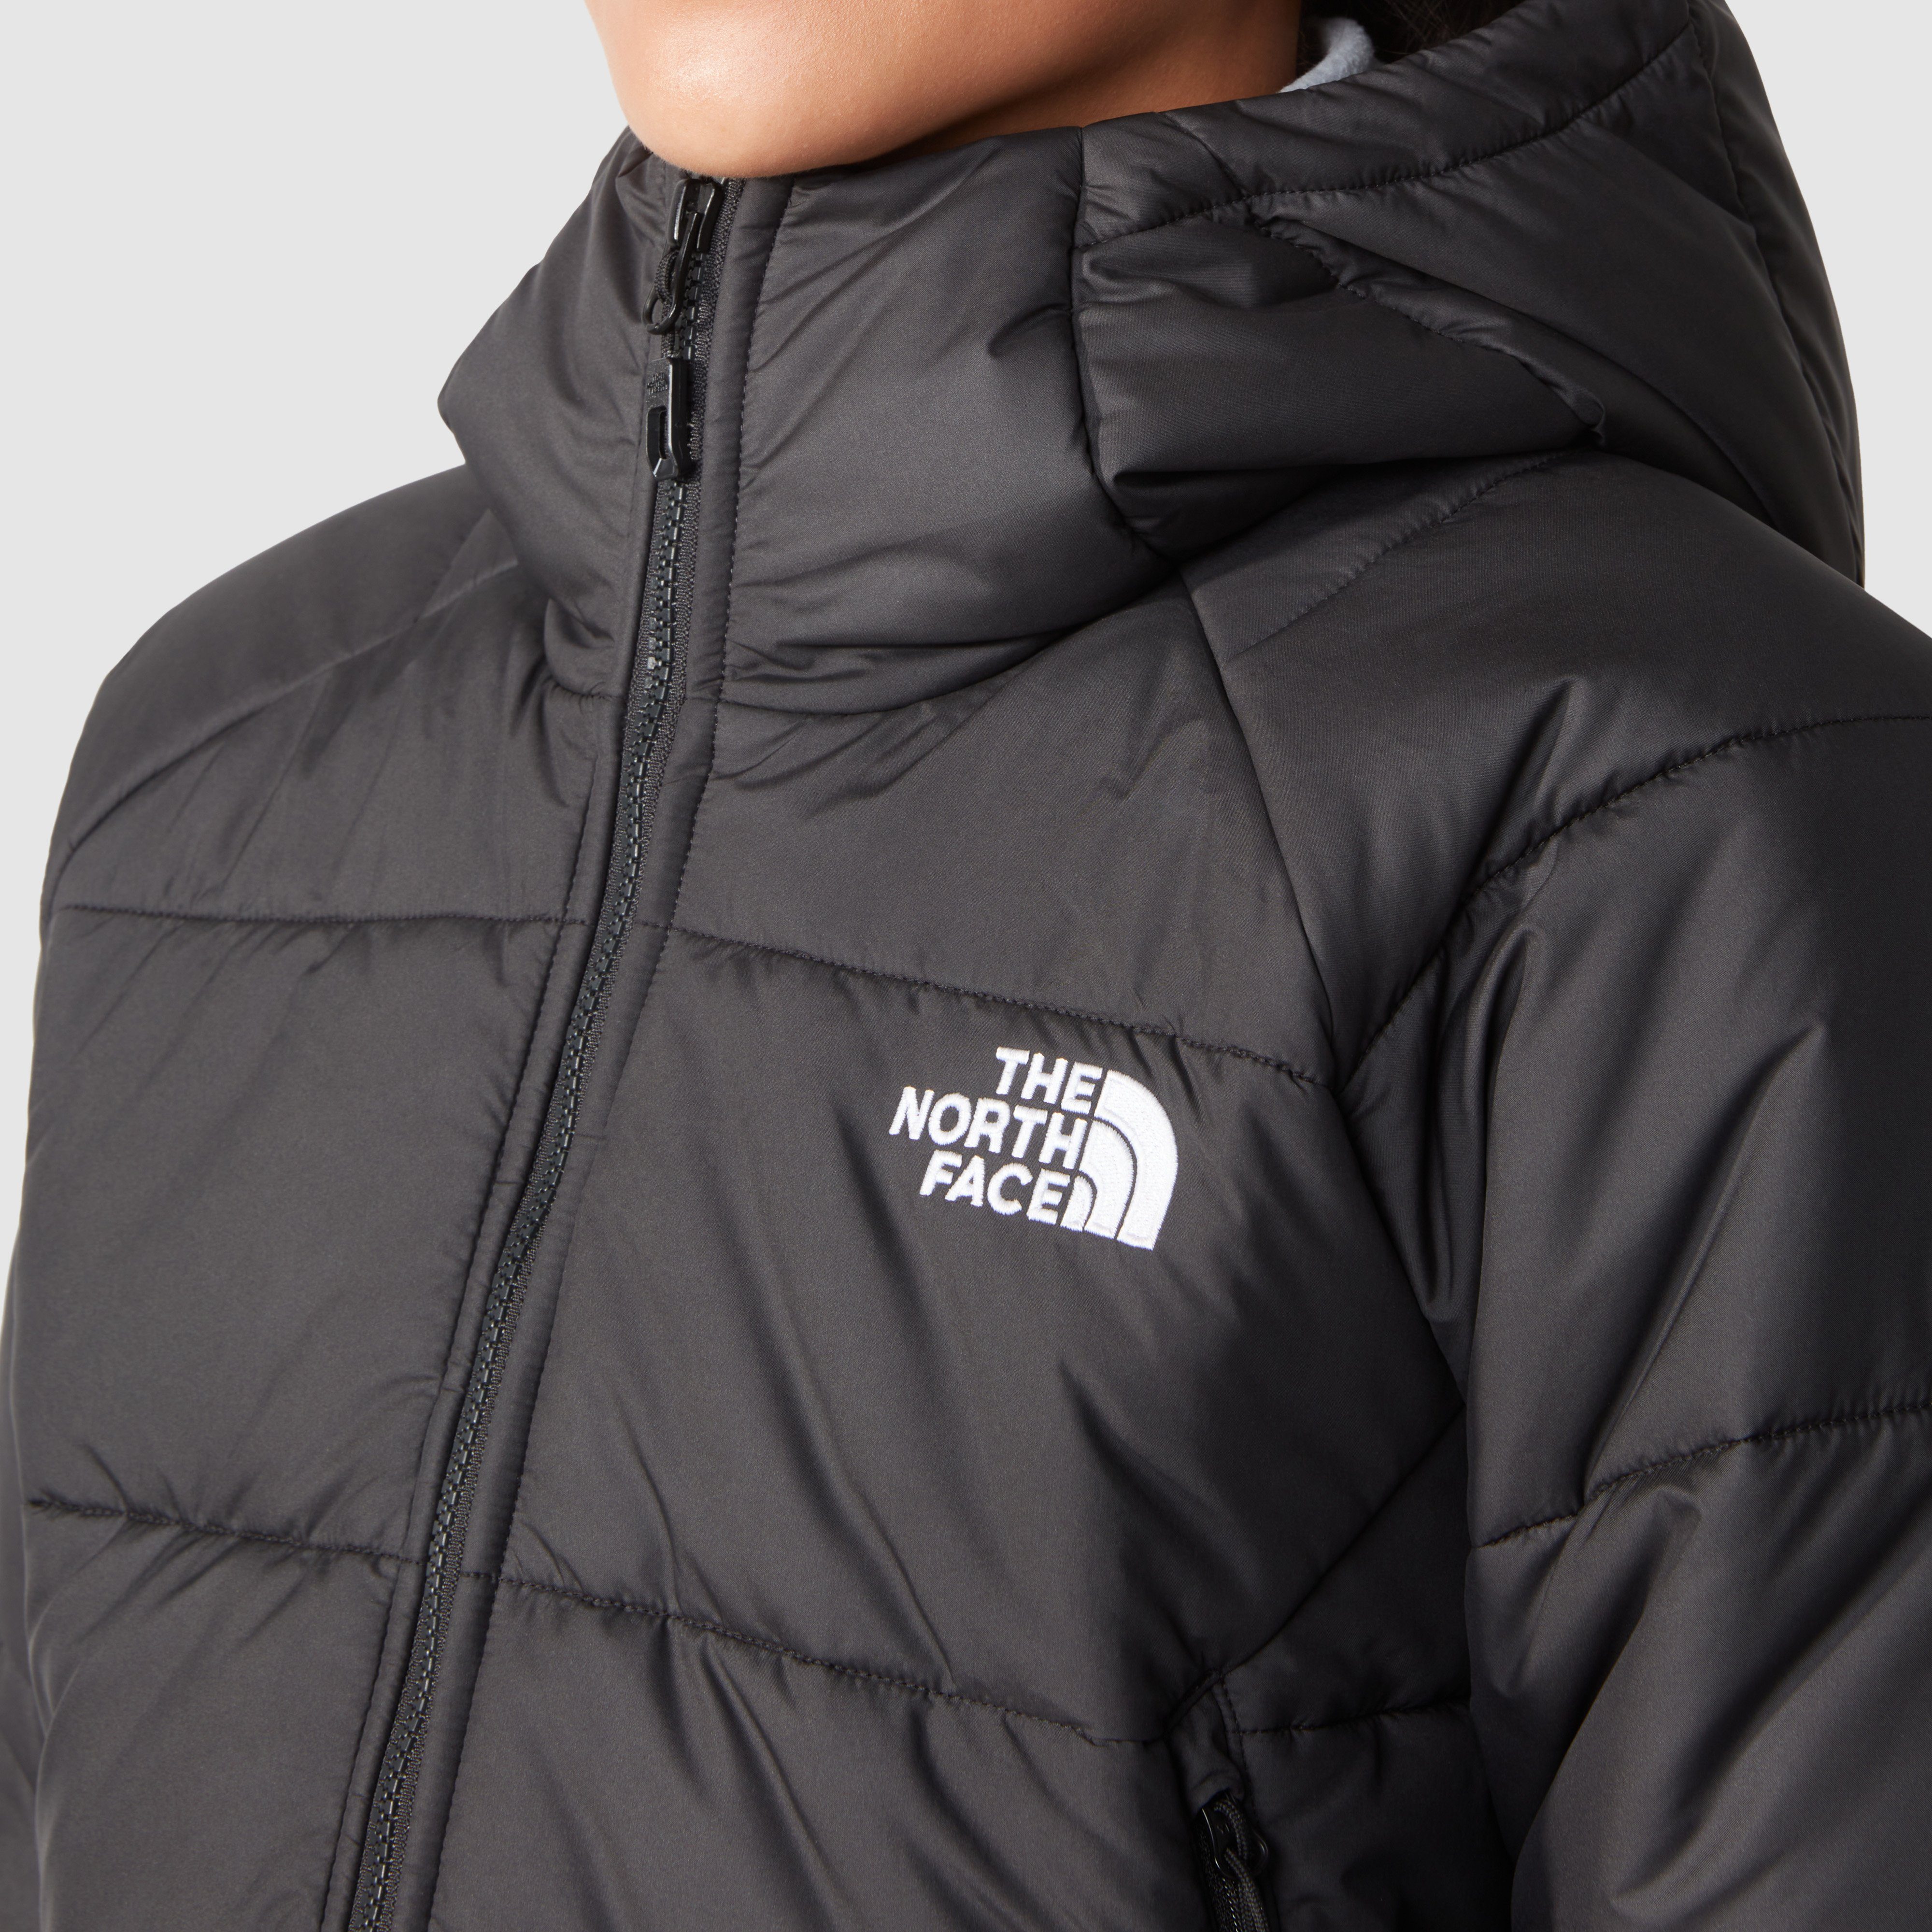 The North Face Funktionsjacke W Logodruck HOODIE black SYNTHETIC HYALITE mit